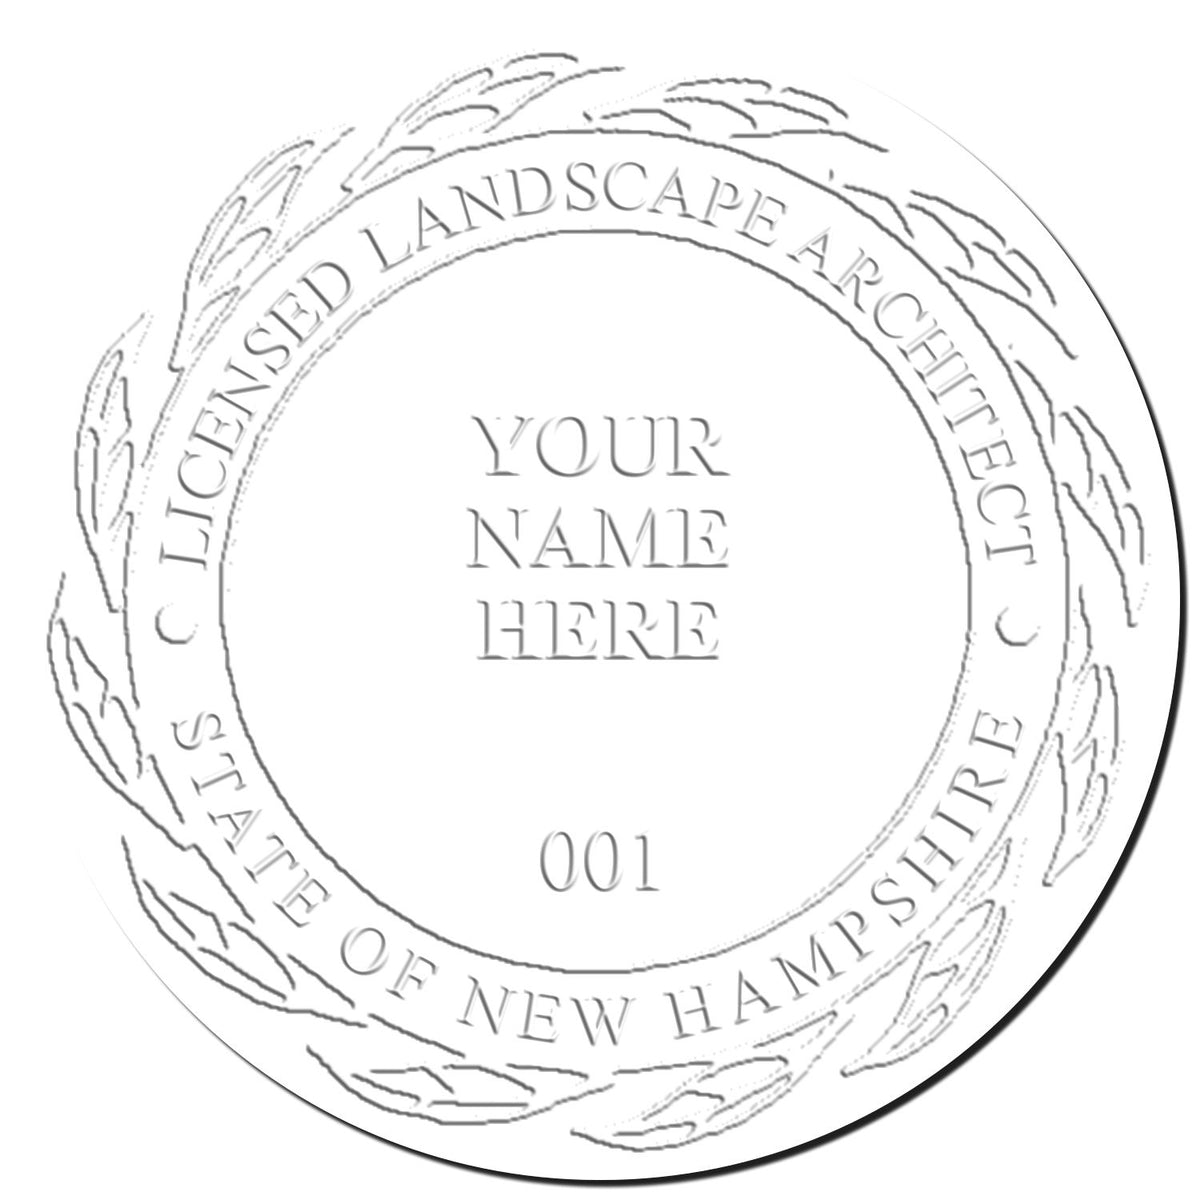 This paper is stamped with a sample imprint of the Gift New Hampshire Landscape Architect Seal, signifying its quality and reliability.